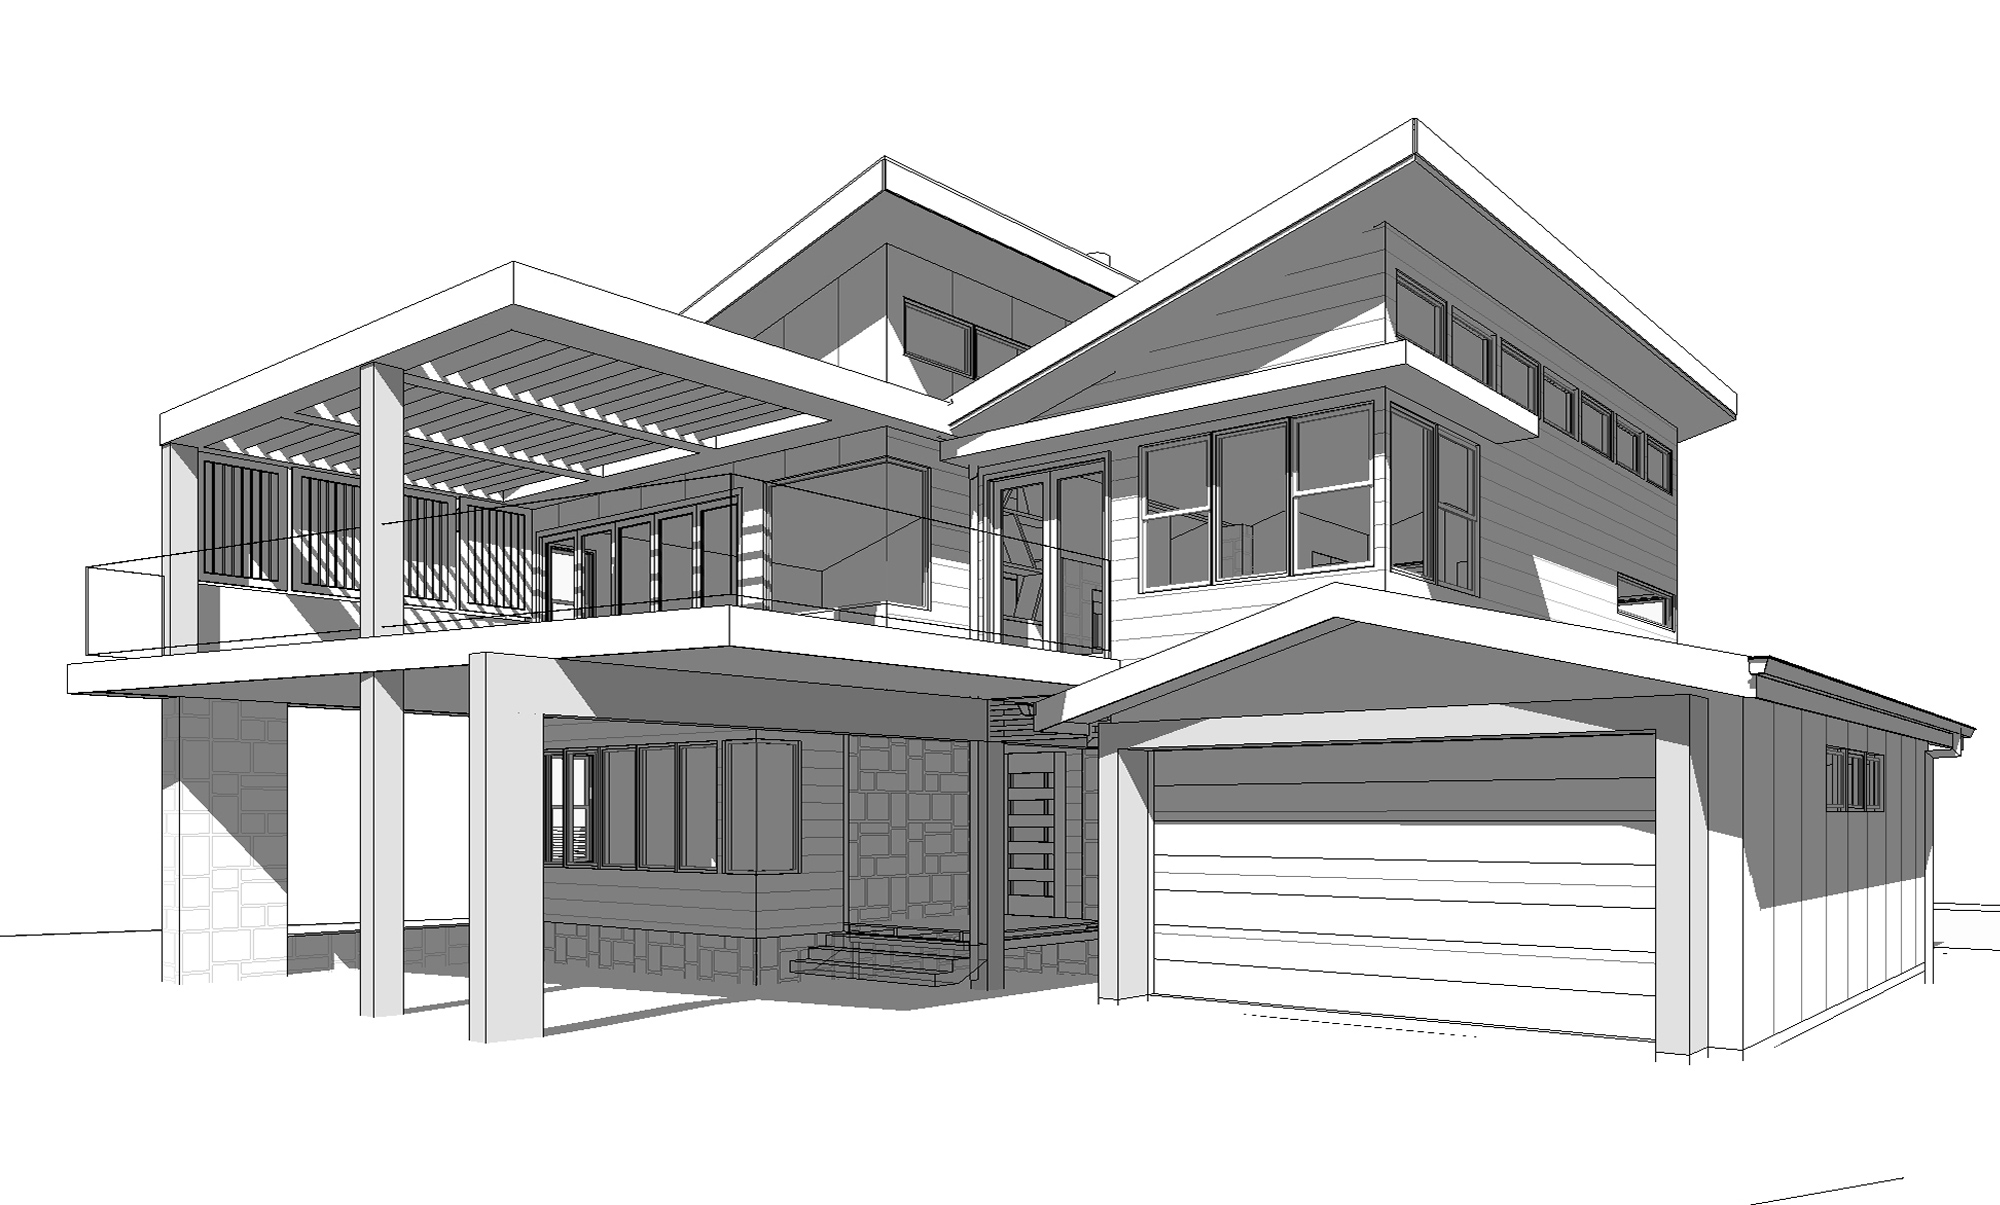 Building Design - Drafting, Architectural Drawing